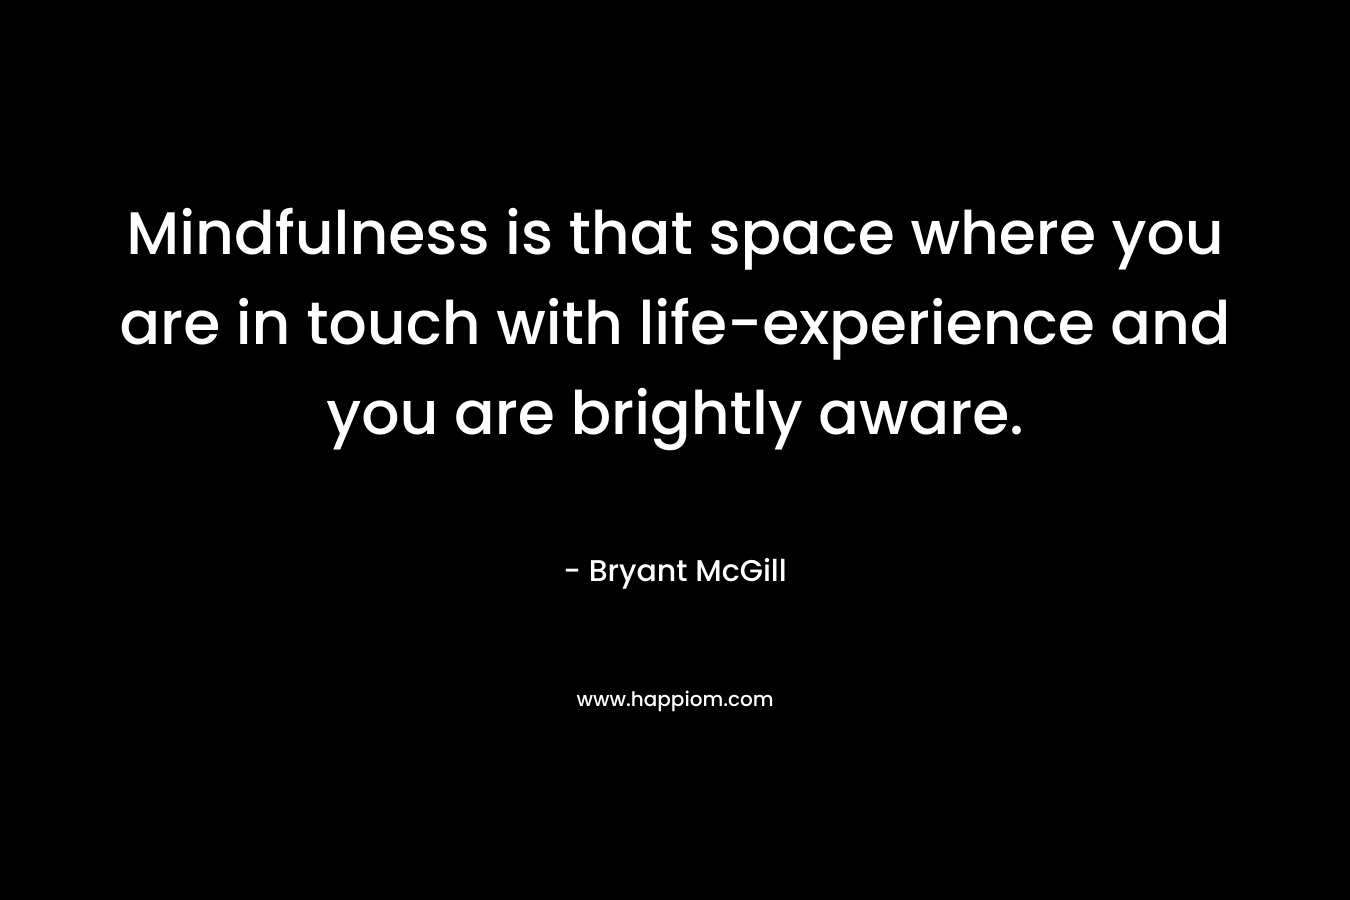 Mindfulness is that space where you are in touch with life-experience and you are brightly aware. – Bryant McGill